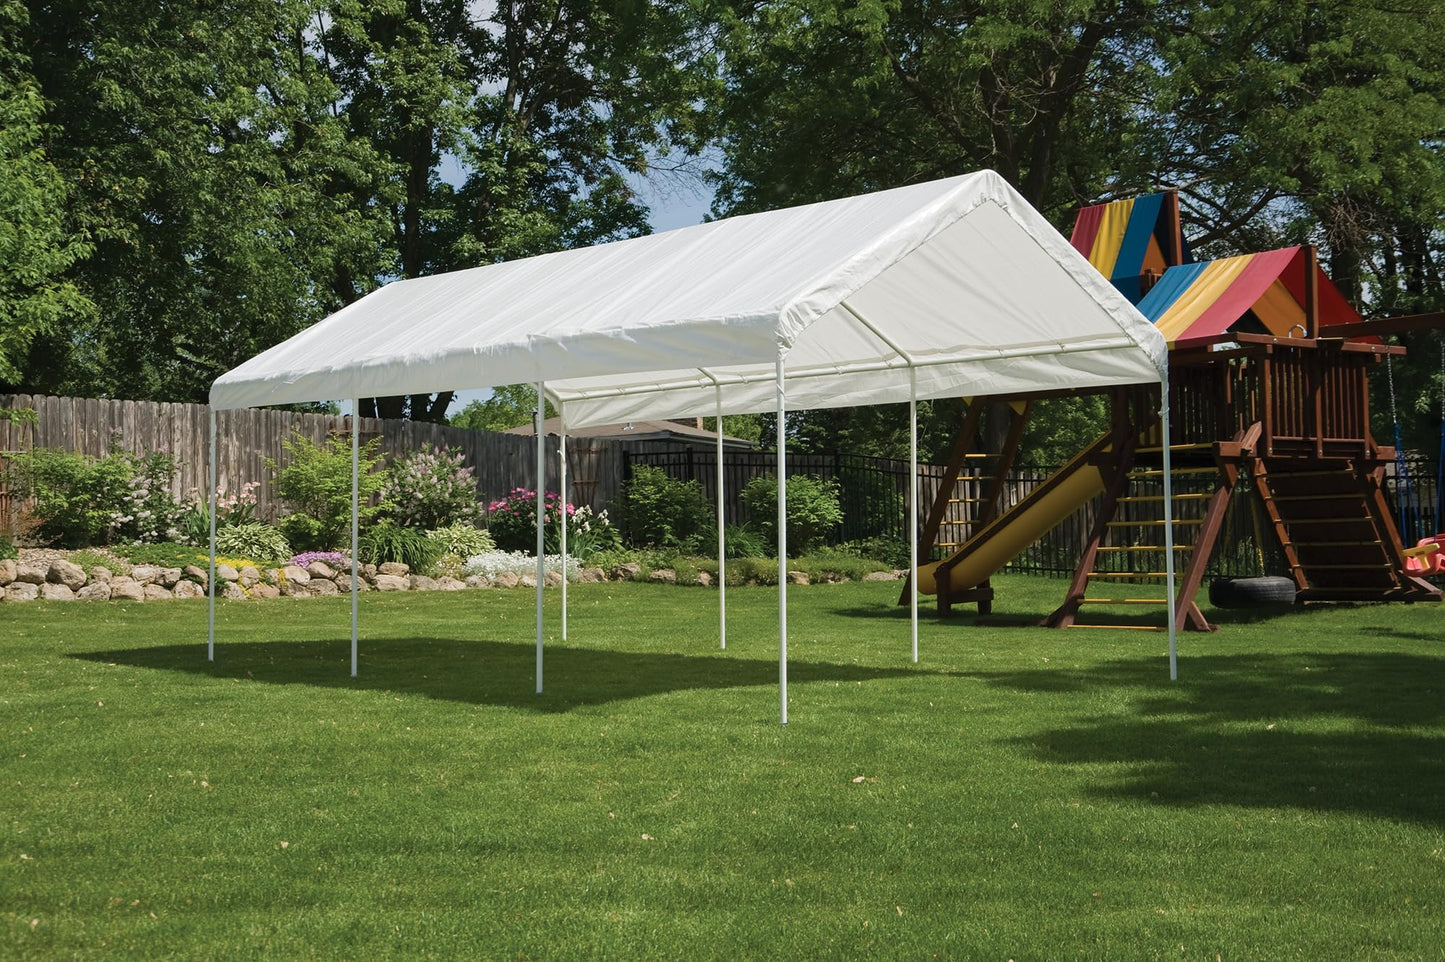 ShelterLogic 10' x 20' MaxAP Large Portable Garage 2in1 Kit Heavy-Duty Steel Frame Outdoor Canopy, Gazebo, or Carport Tent with Enclosure for Car, SUV, Truck, Boat, Tractor, White Canopy + Enclosure